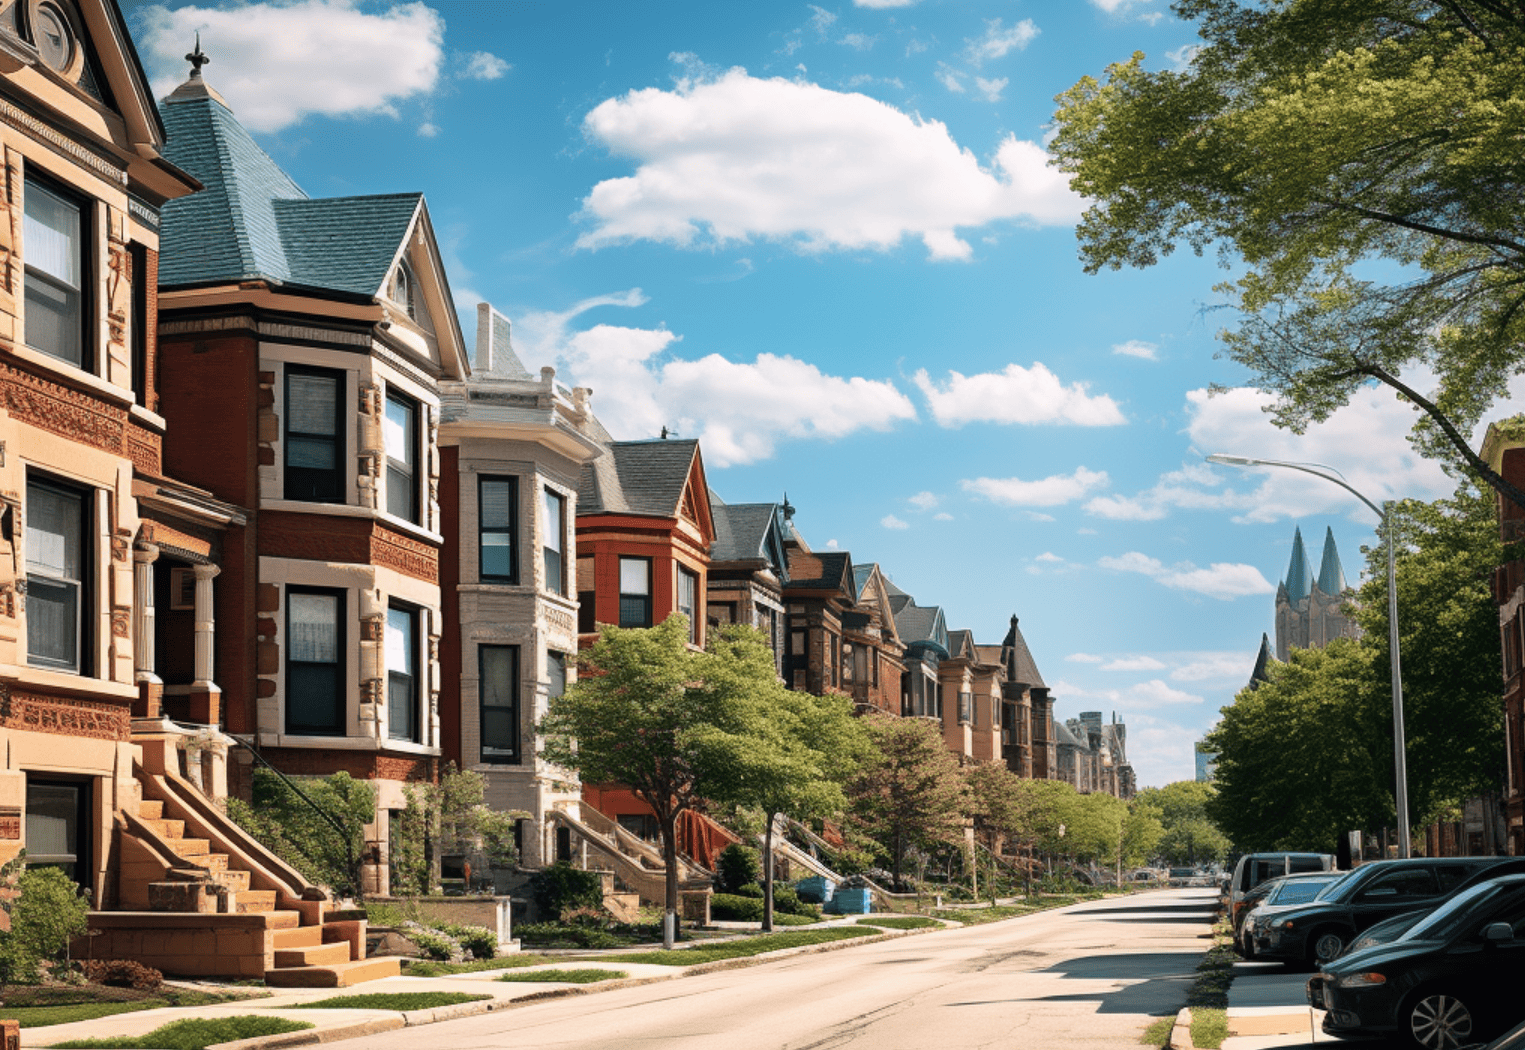 a leafy suburb picture of Albany Park Chicago. A row of 3 storey houses